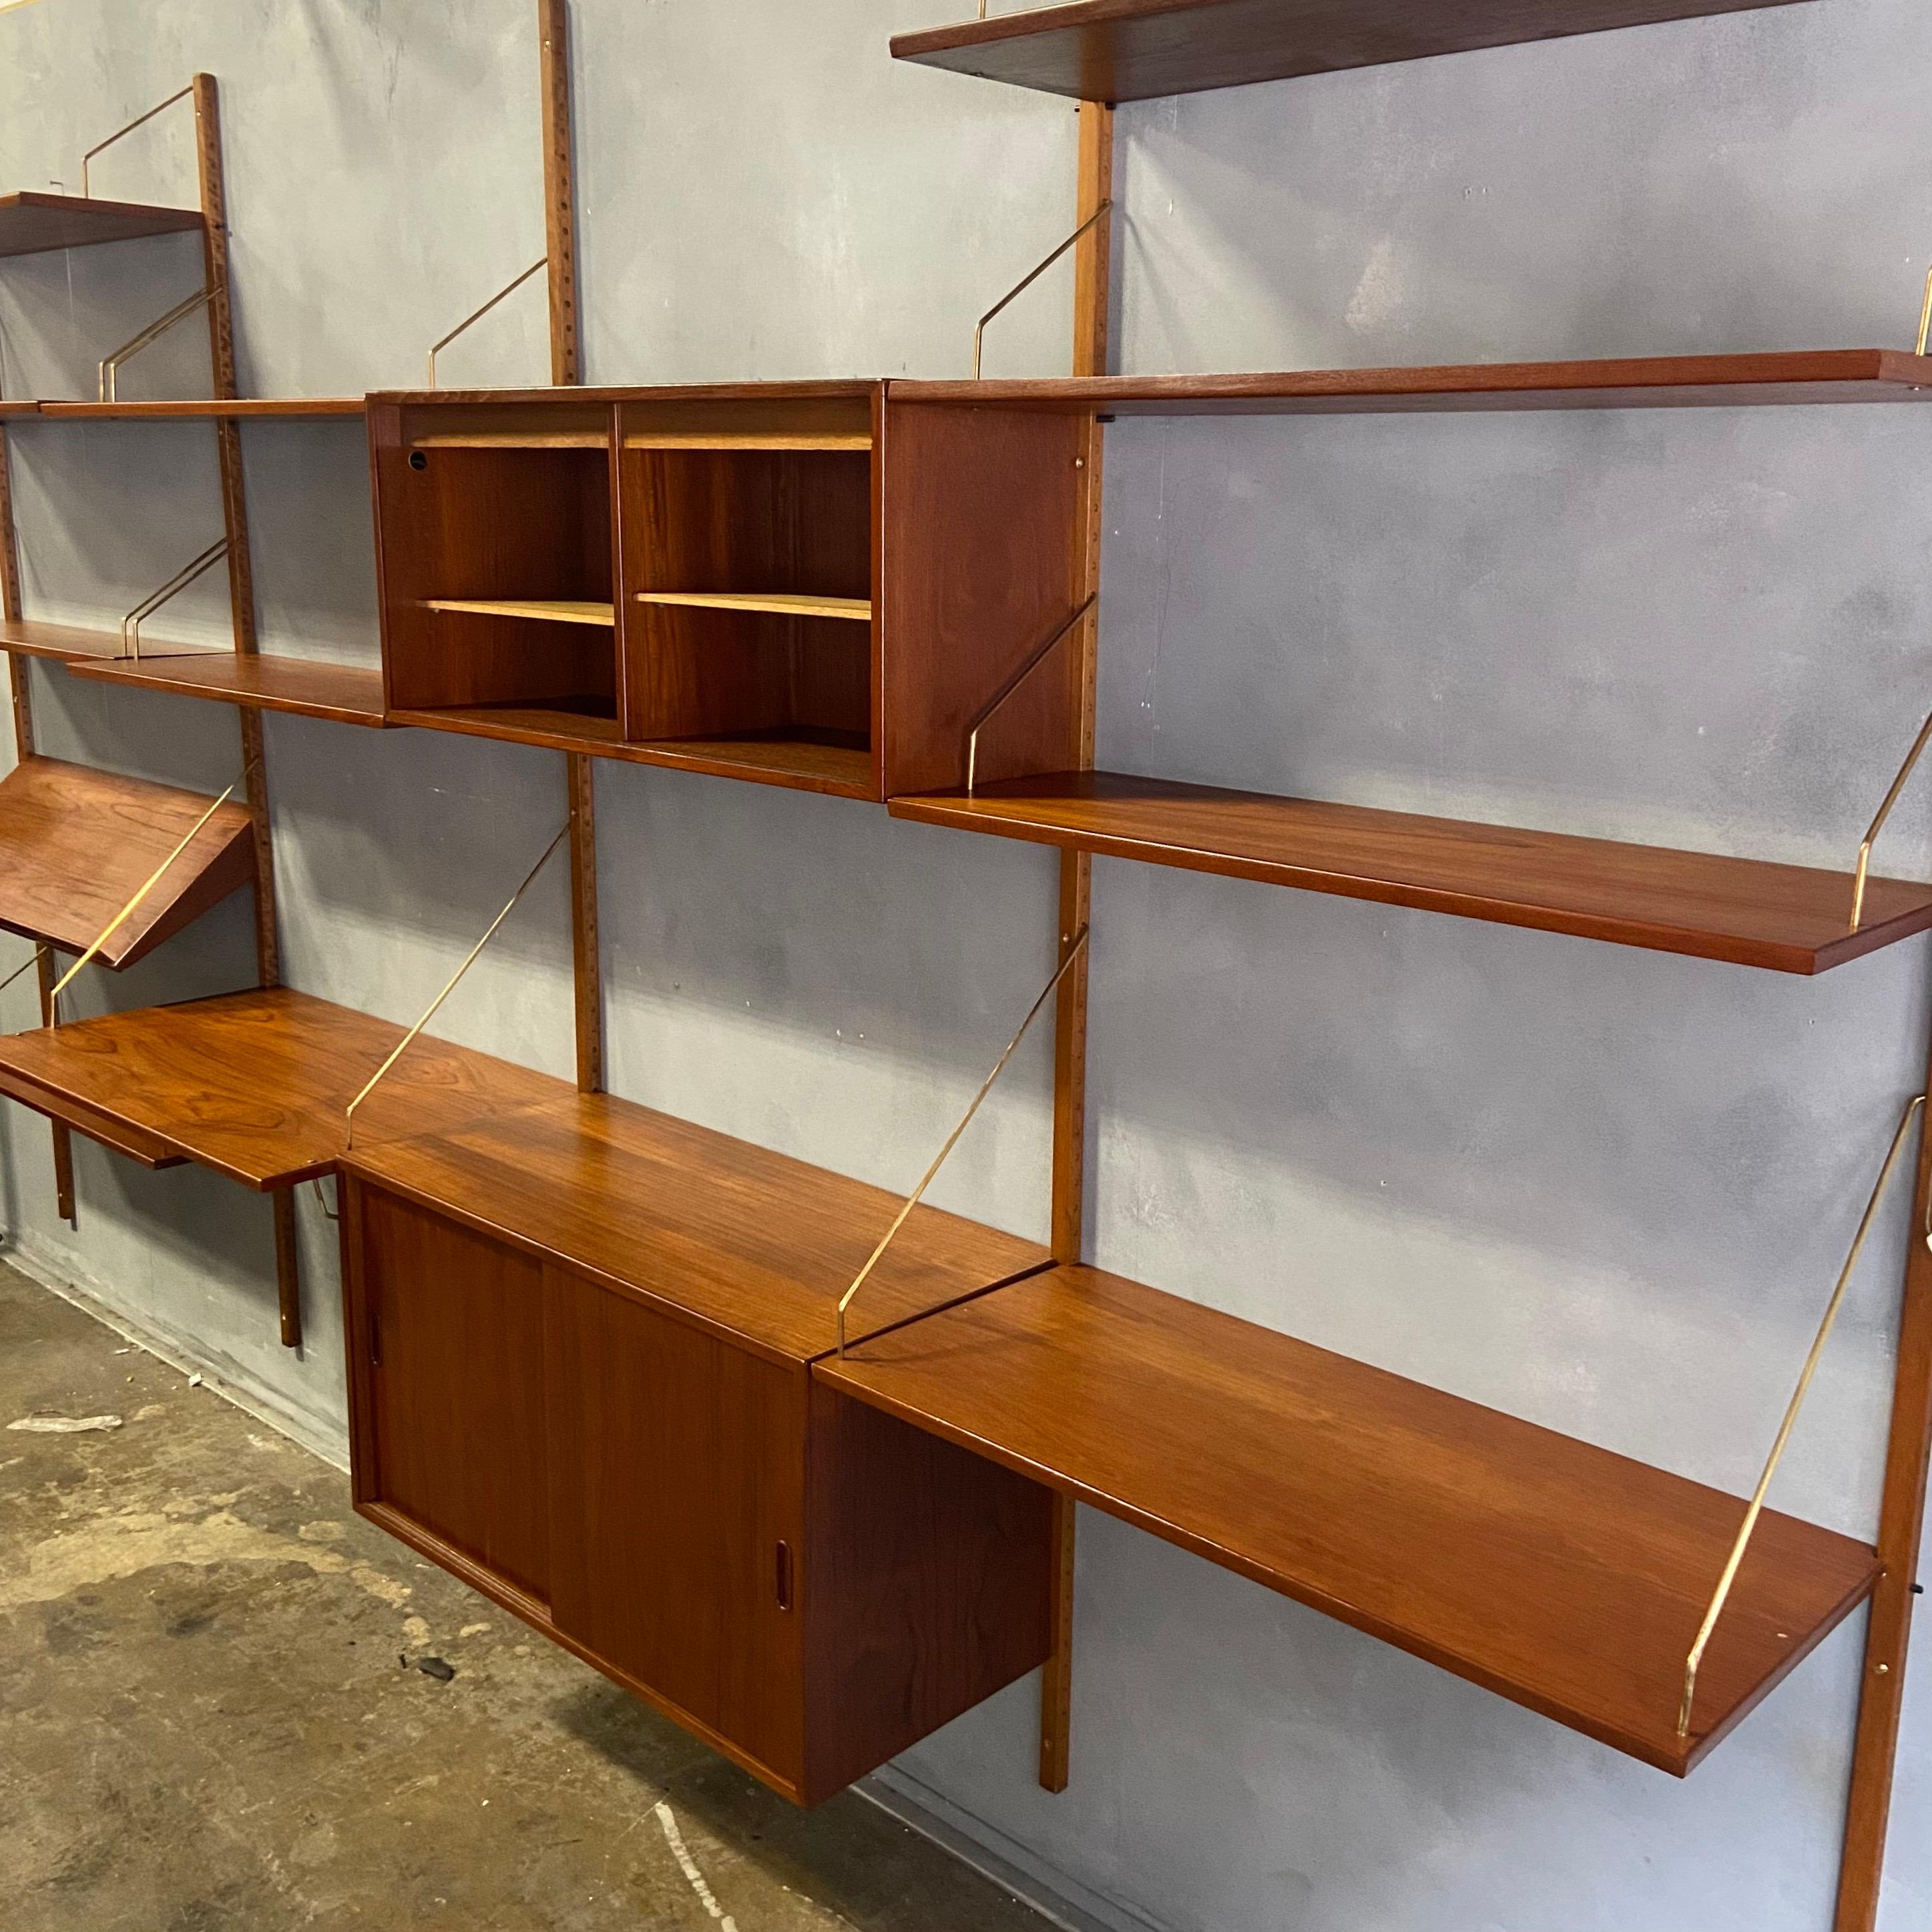 Gorgeous teak wall unit with striking brass hanging elements. Wall unit has 4 bays that are 34.5 inches apart- rail to rail. Most shelves are 12'' deep and two are 9''. The wall unit features a cabinet with divided shelves, a desk that is 19.5''